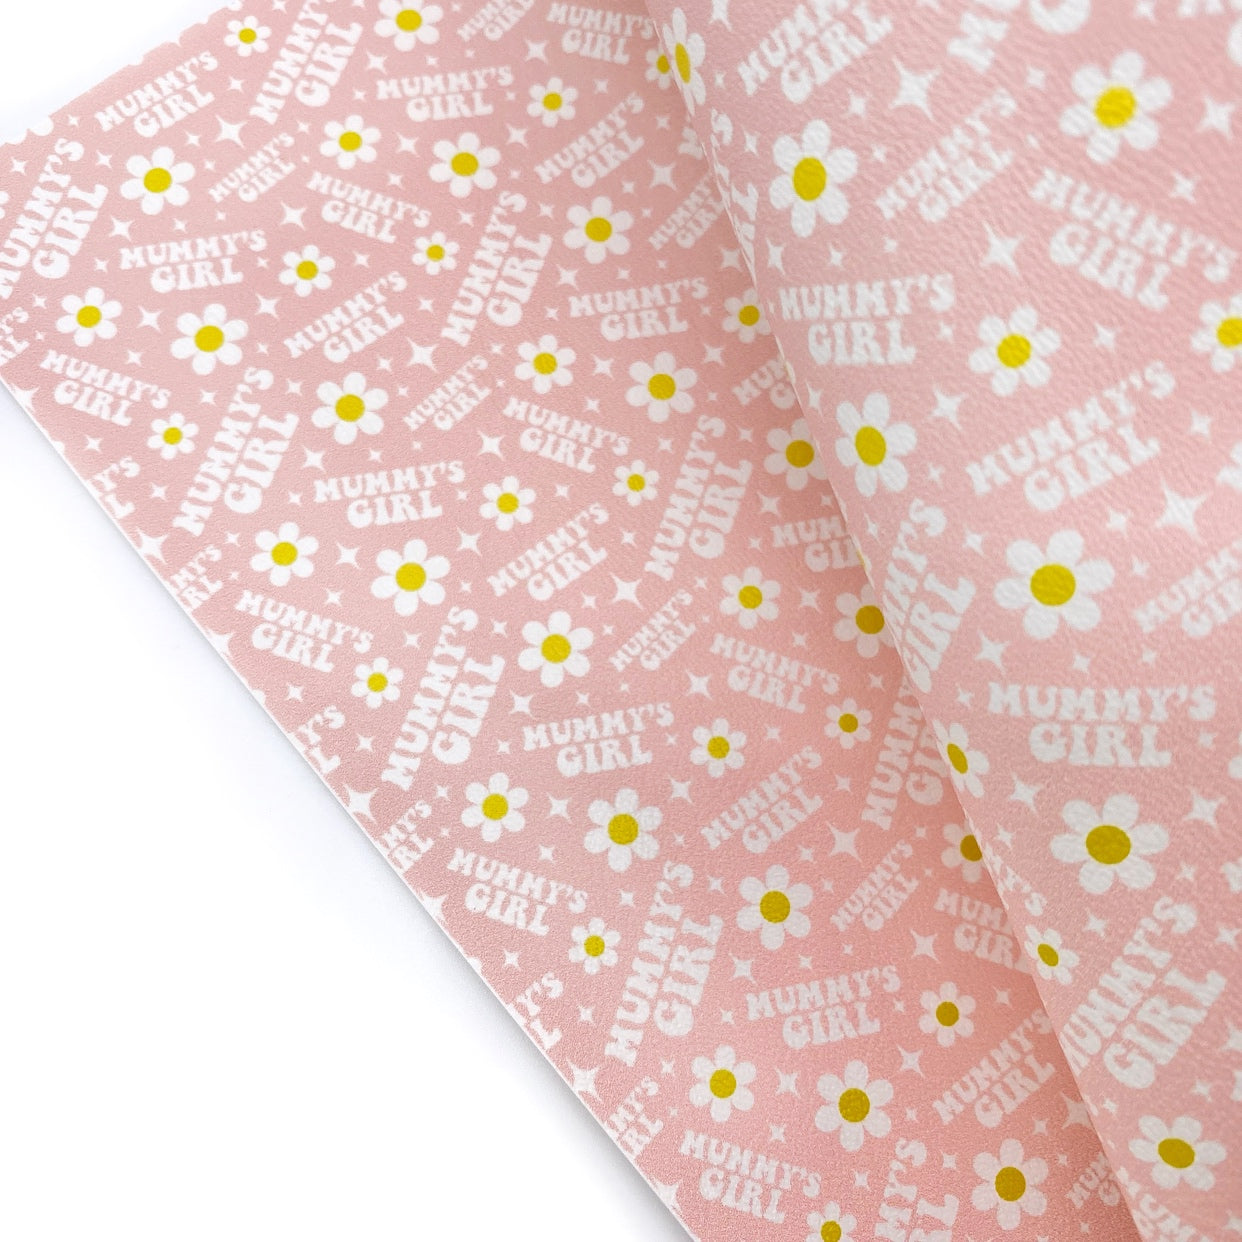 Mummy's Girl Pink Daisy Premium Faux Leather Fabric Sheets